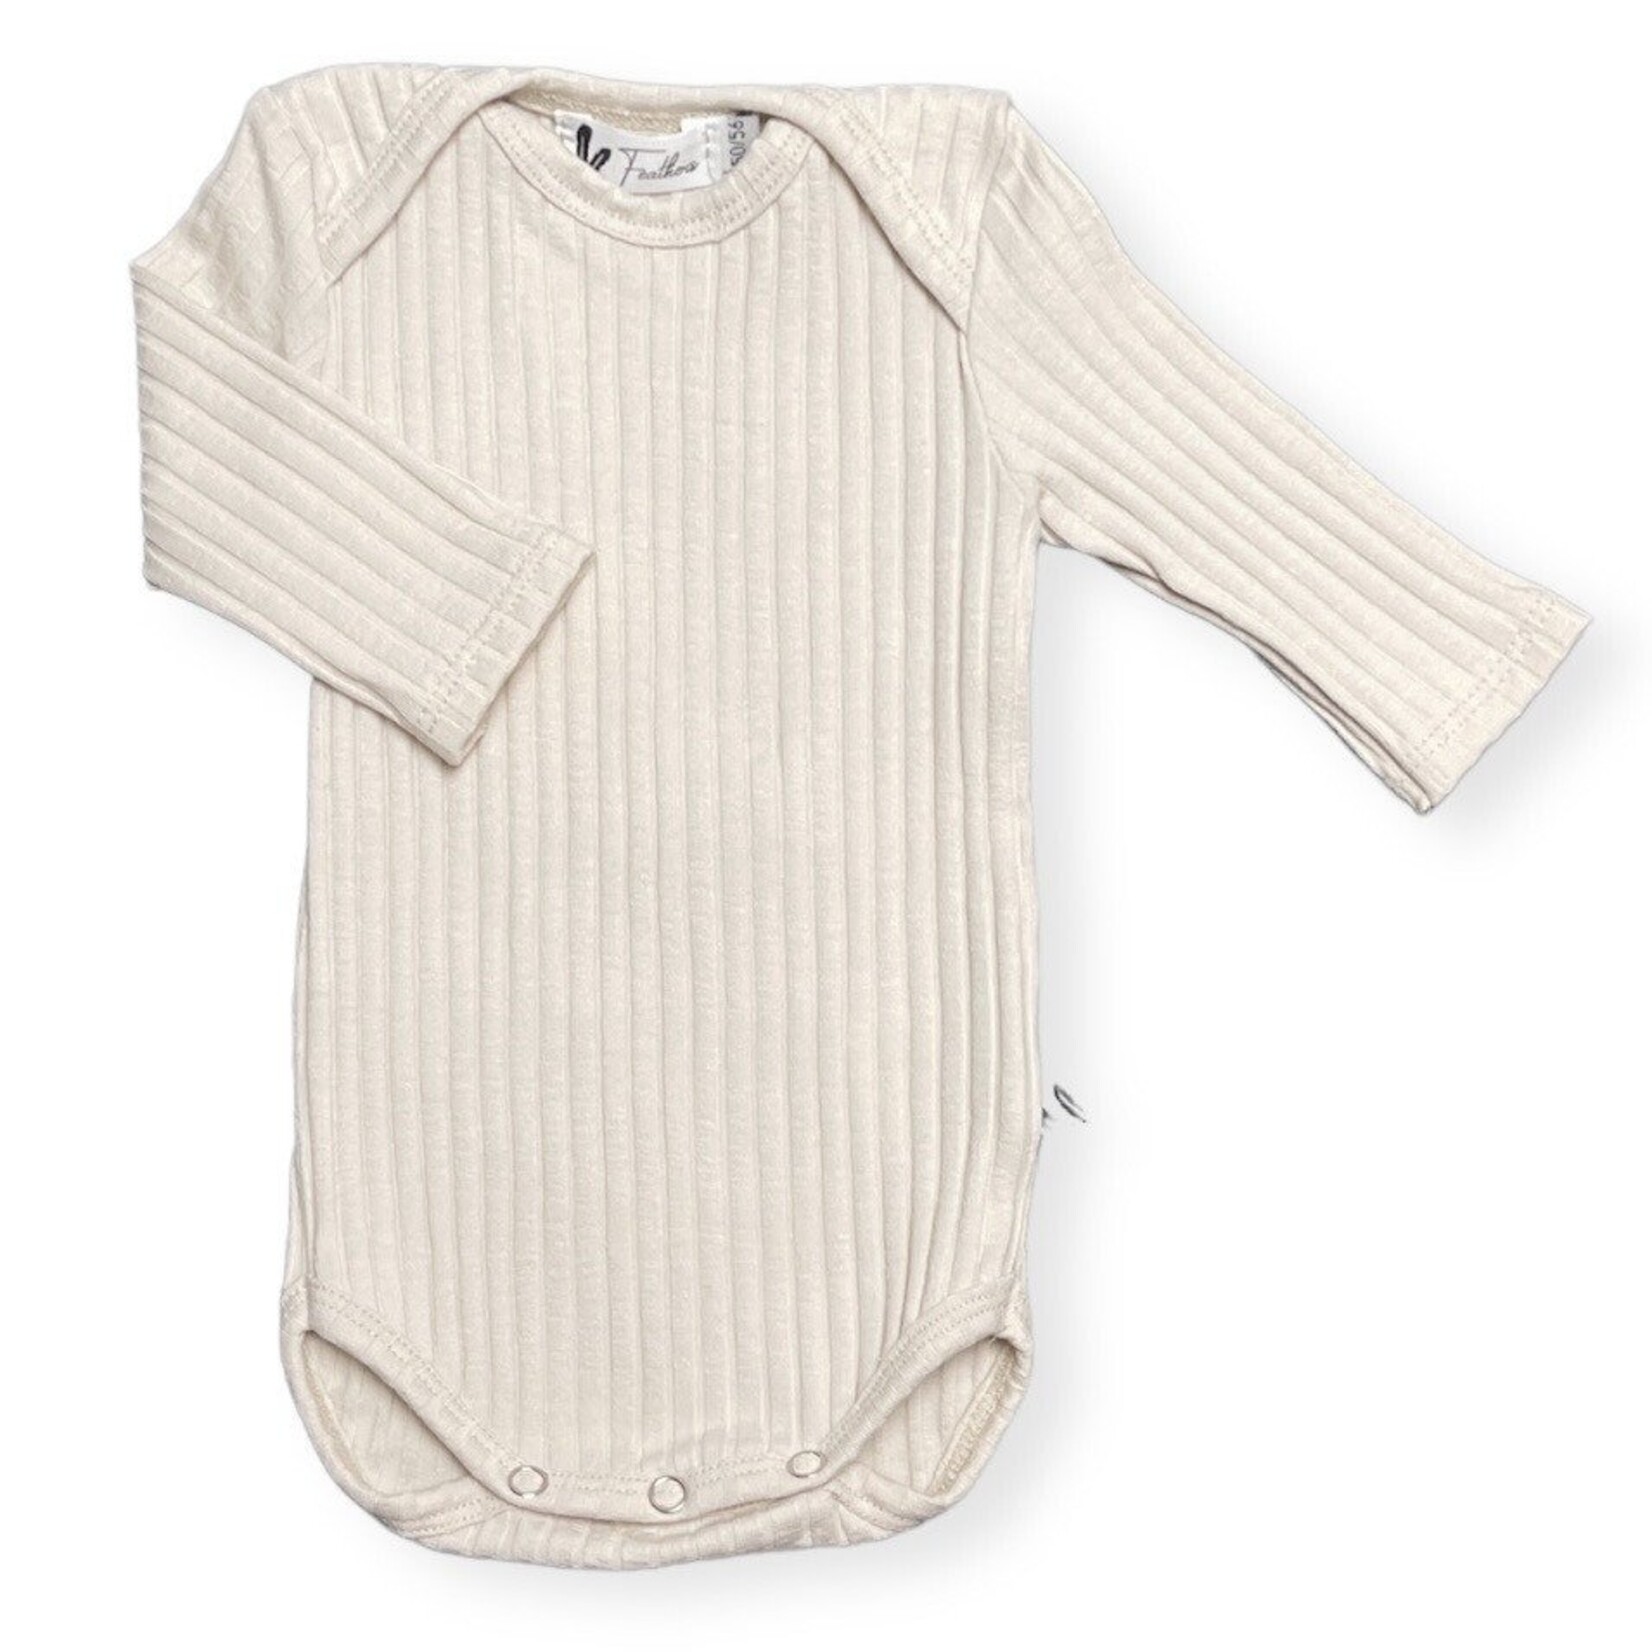 Feathers® Rompertje lange mouw wide rib jersey - Natural Beige